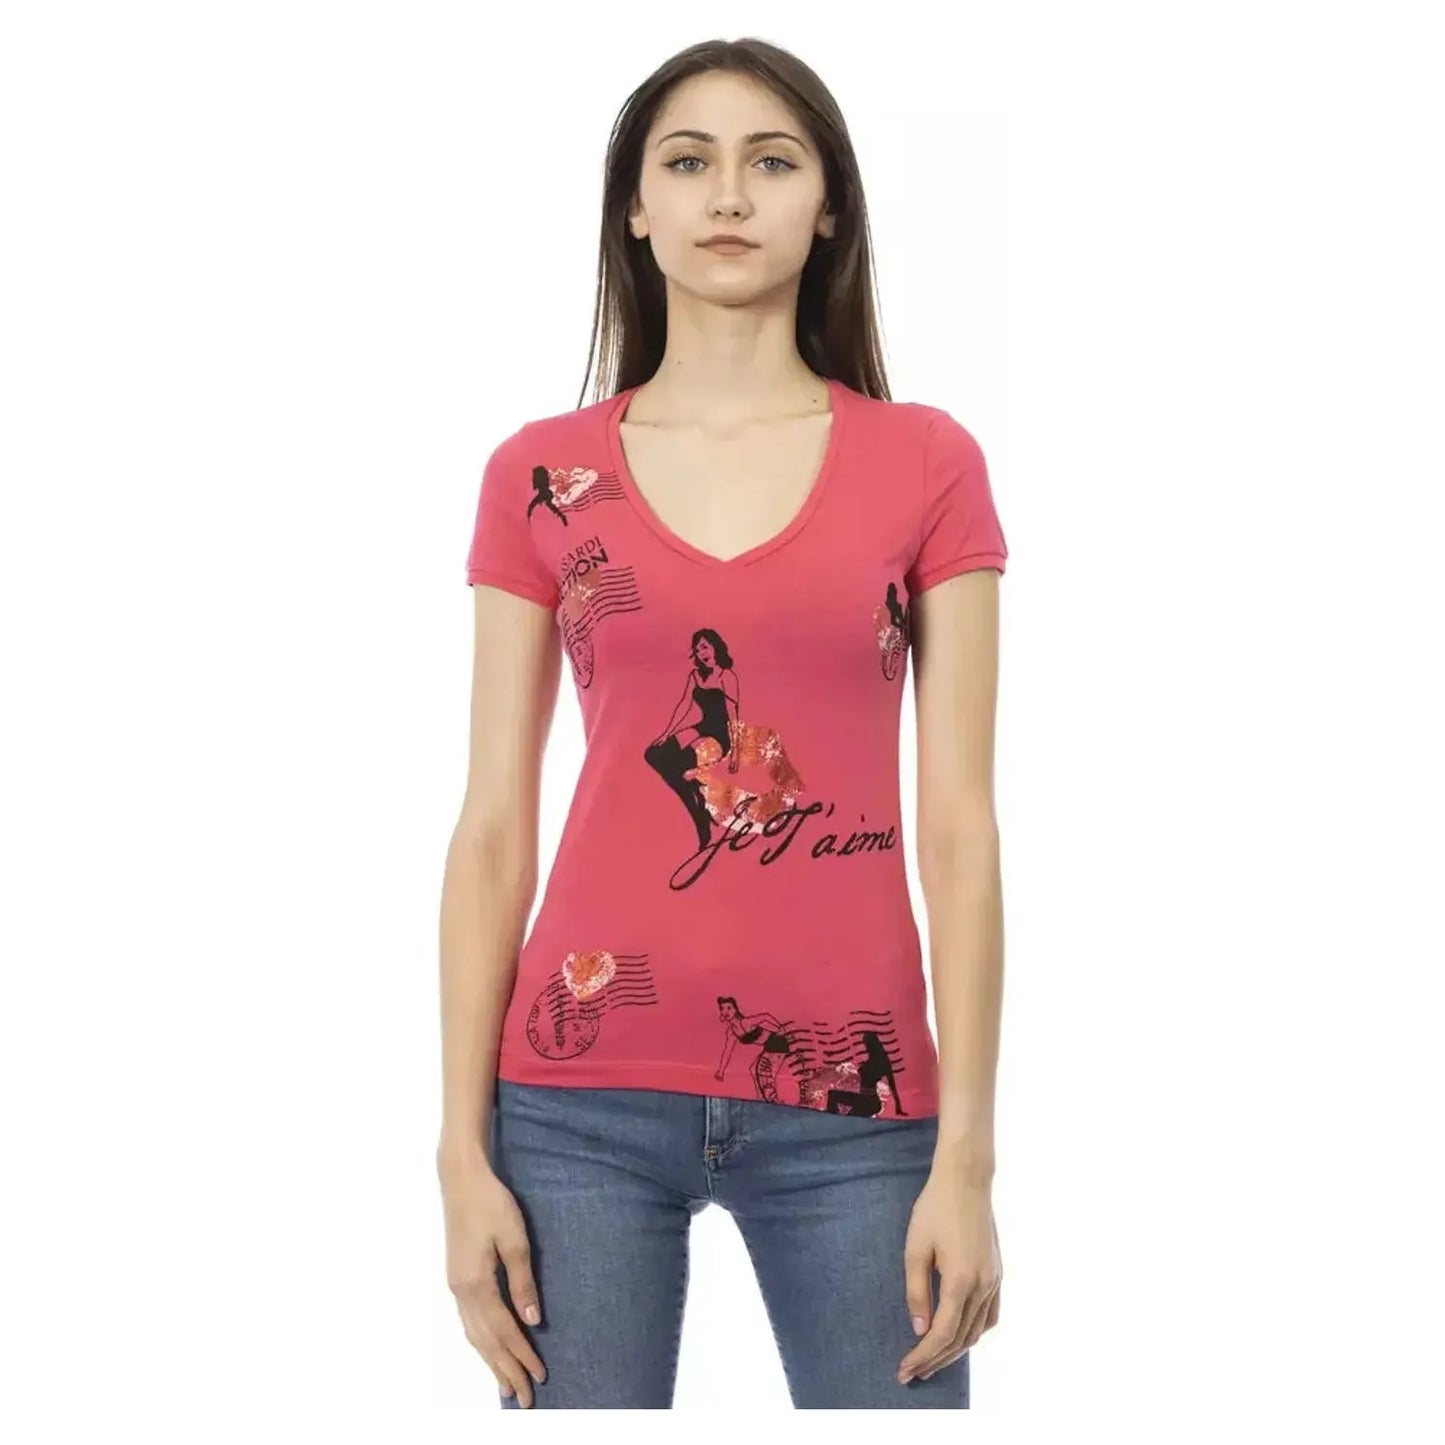 Trussardi Action V-Neck Cotton Blend Tee with Chic Front Print pink-cotton-tops-t-shirt-43